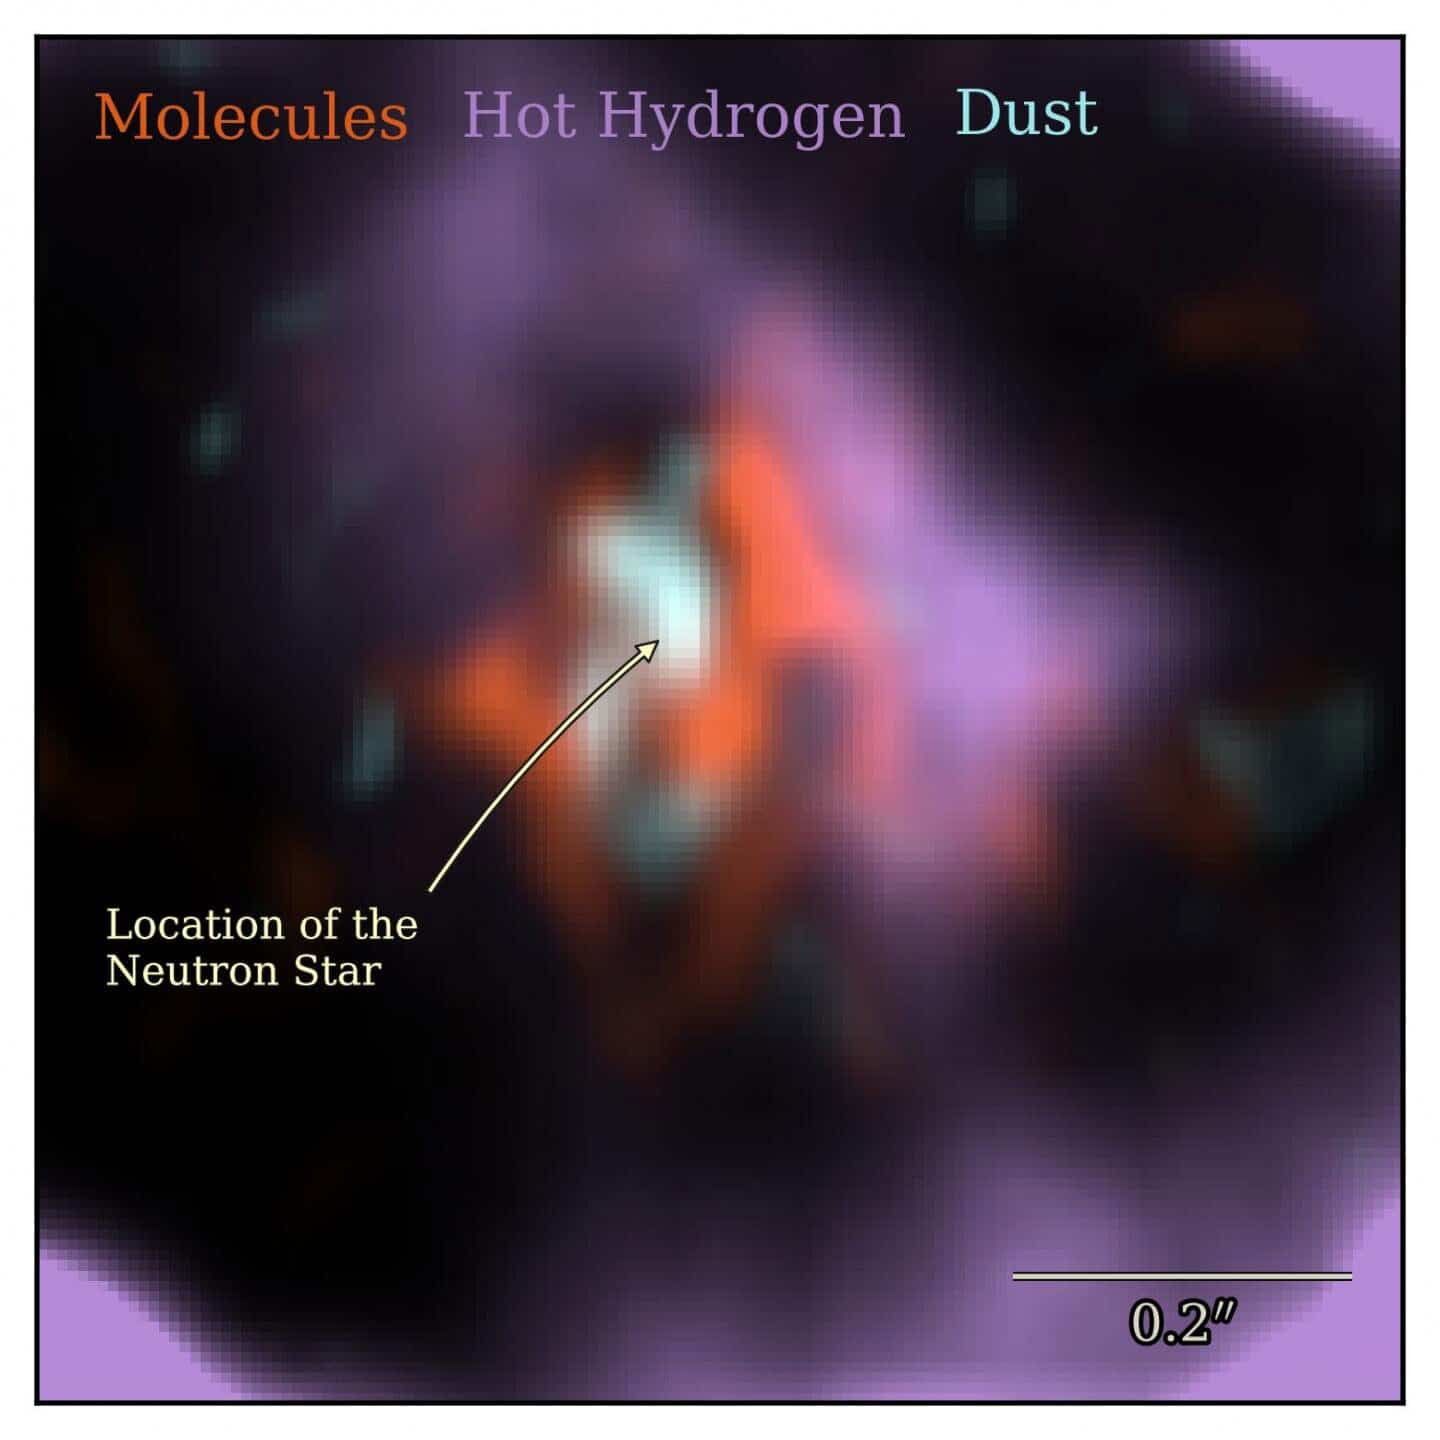 A close-up view of different components in the SN 1987A system: carbon monoxide molecular gas is shown in orange, hot hydrogen gas is shown in purple, and the dust which surrounds the neutron star is shown in cyan. Credit: Cardiff University